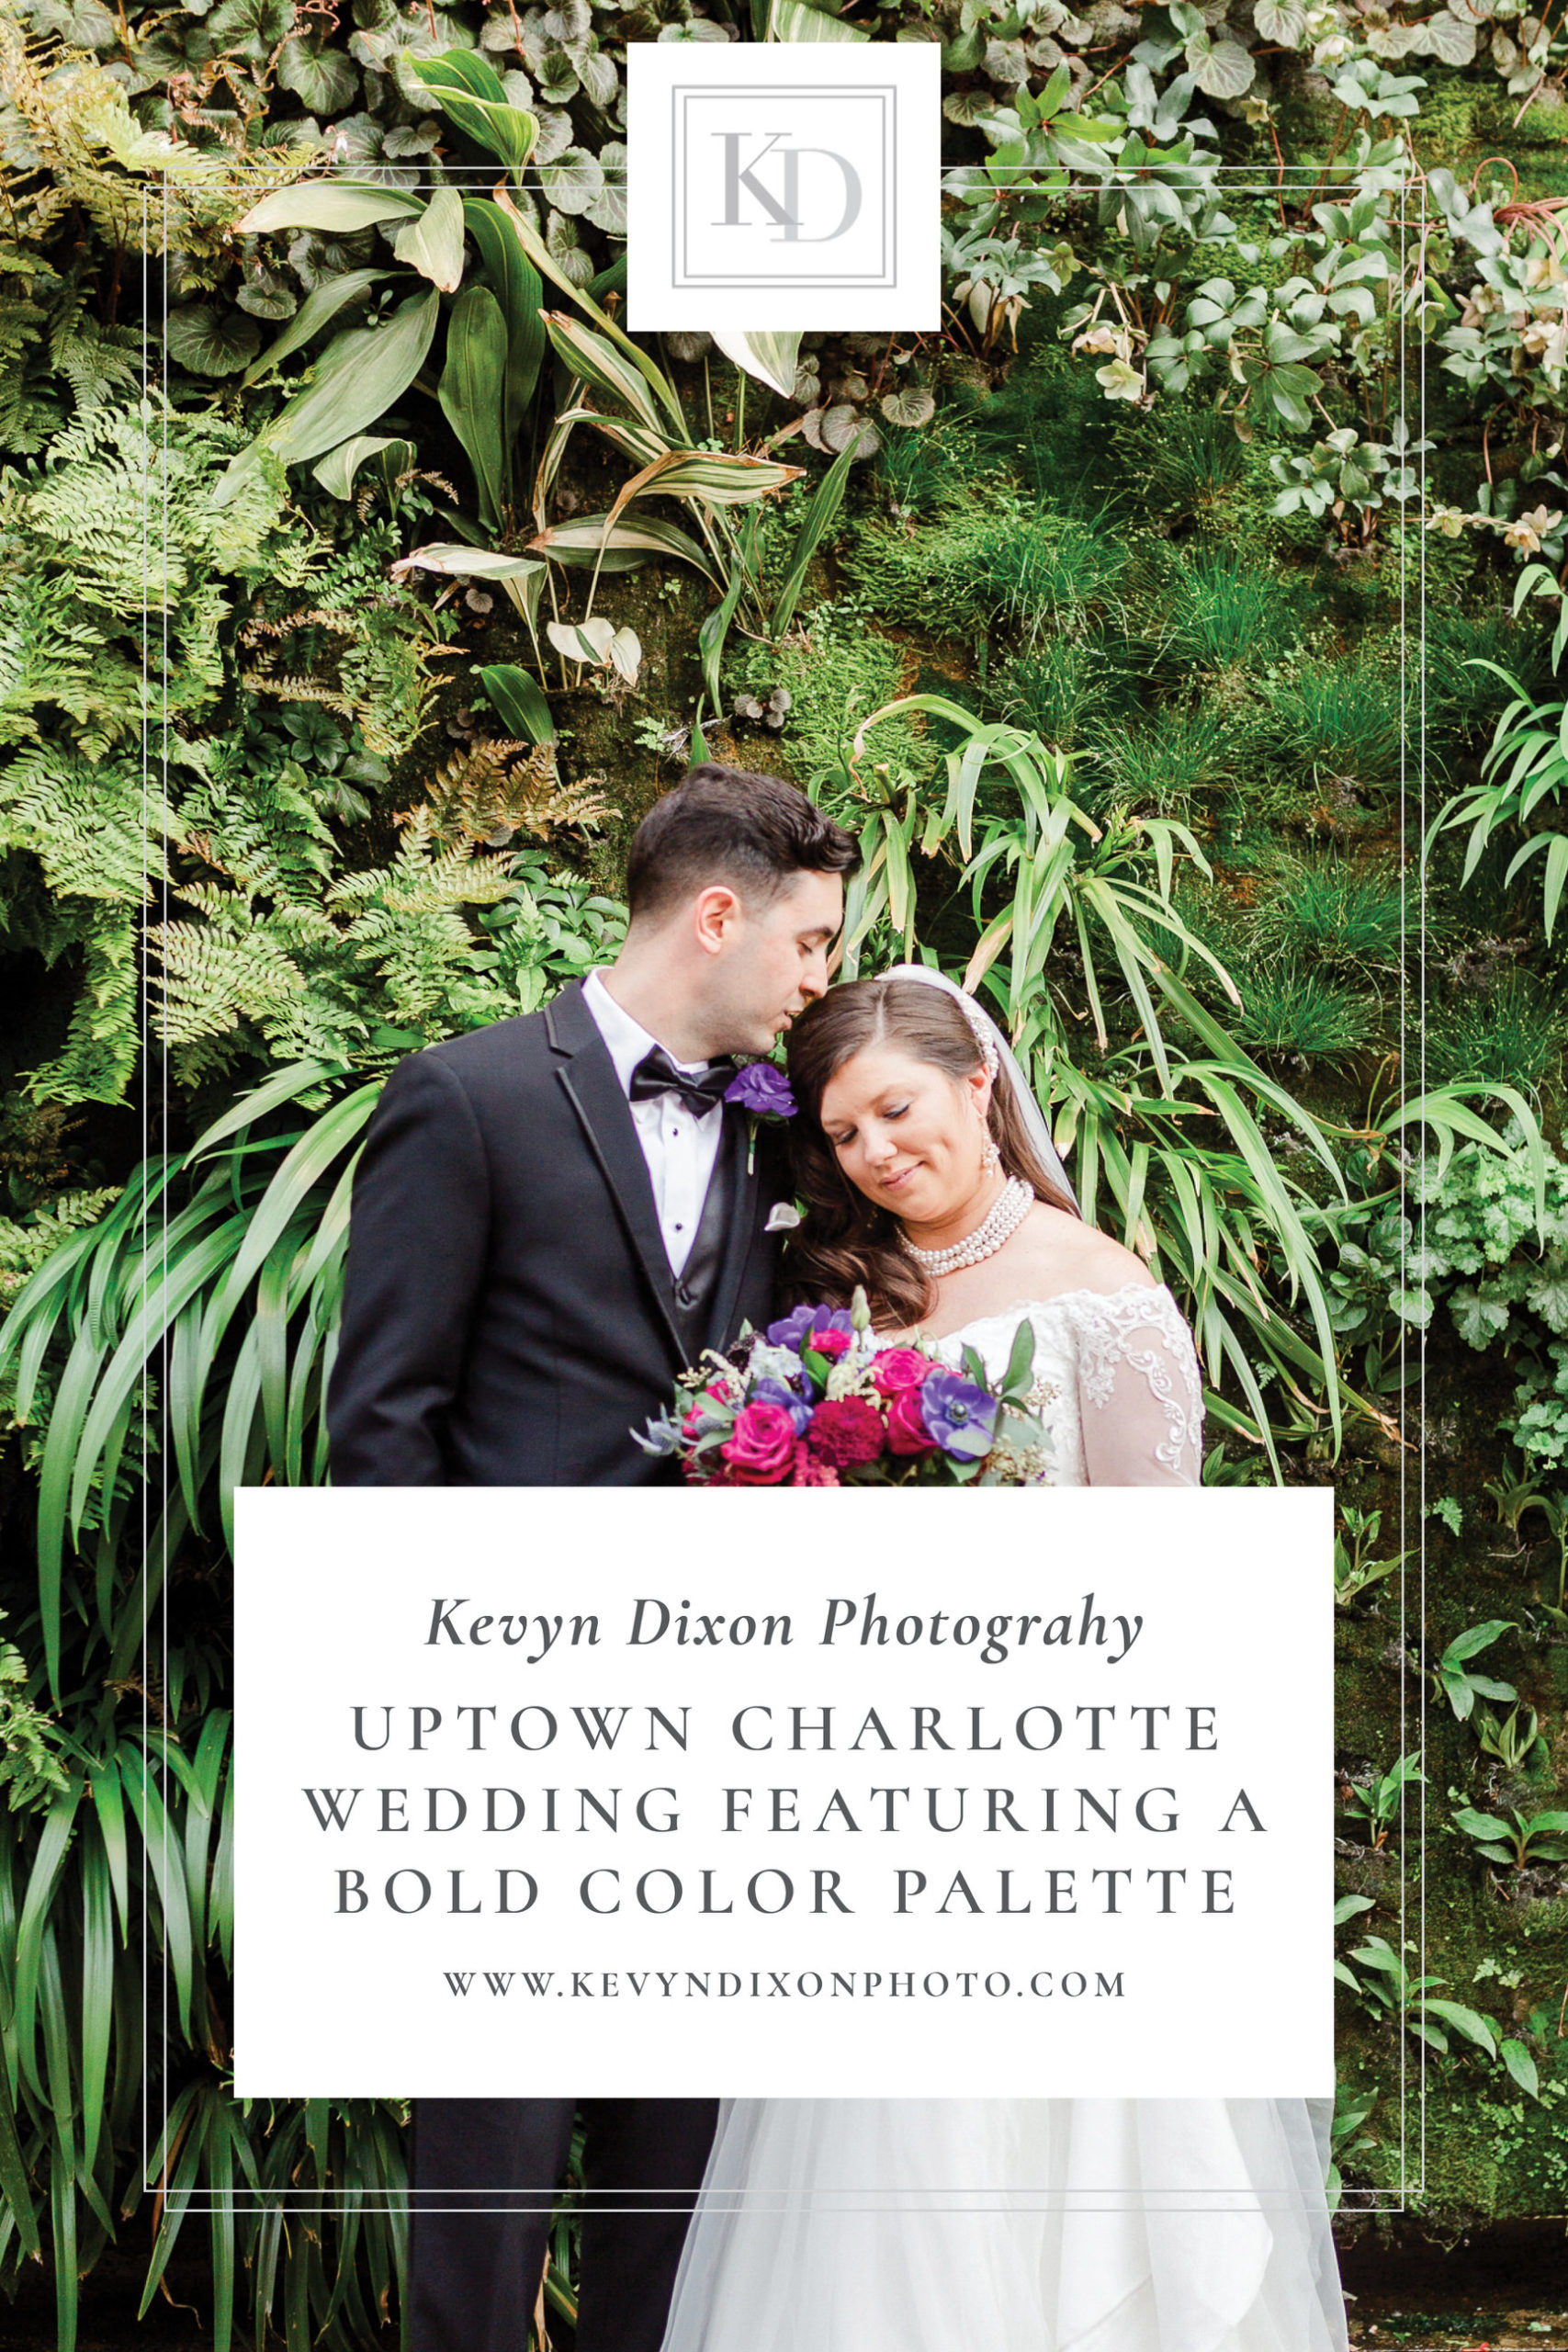 Colorful Uptown Charlotte Wedding Pin Image featuring Bride and Groom Outdoor Portrait with Wall of Greenery background